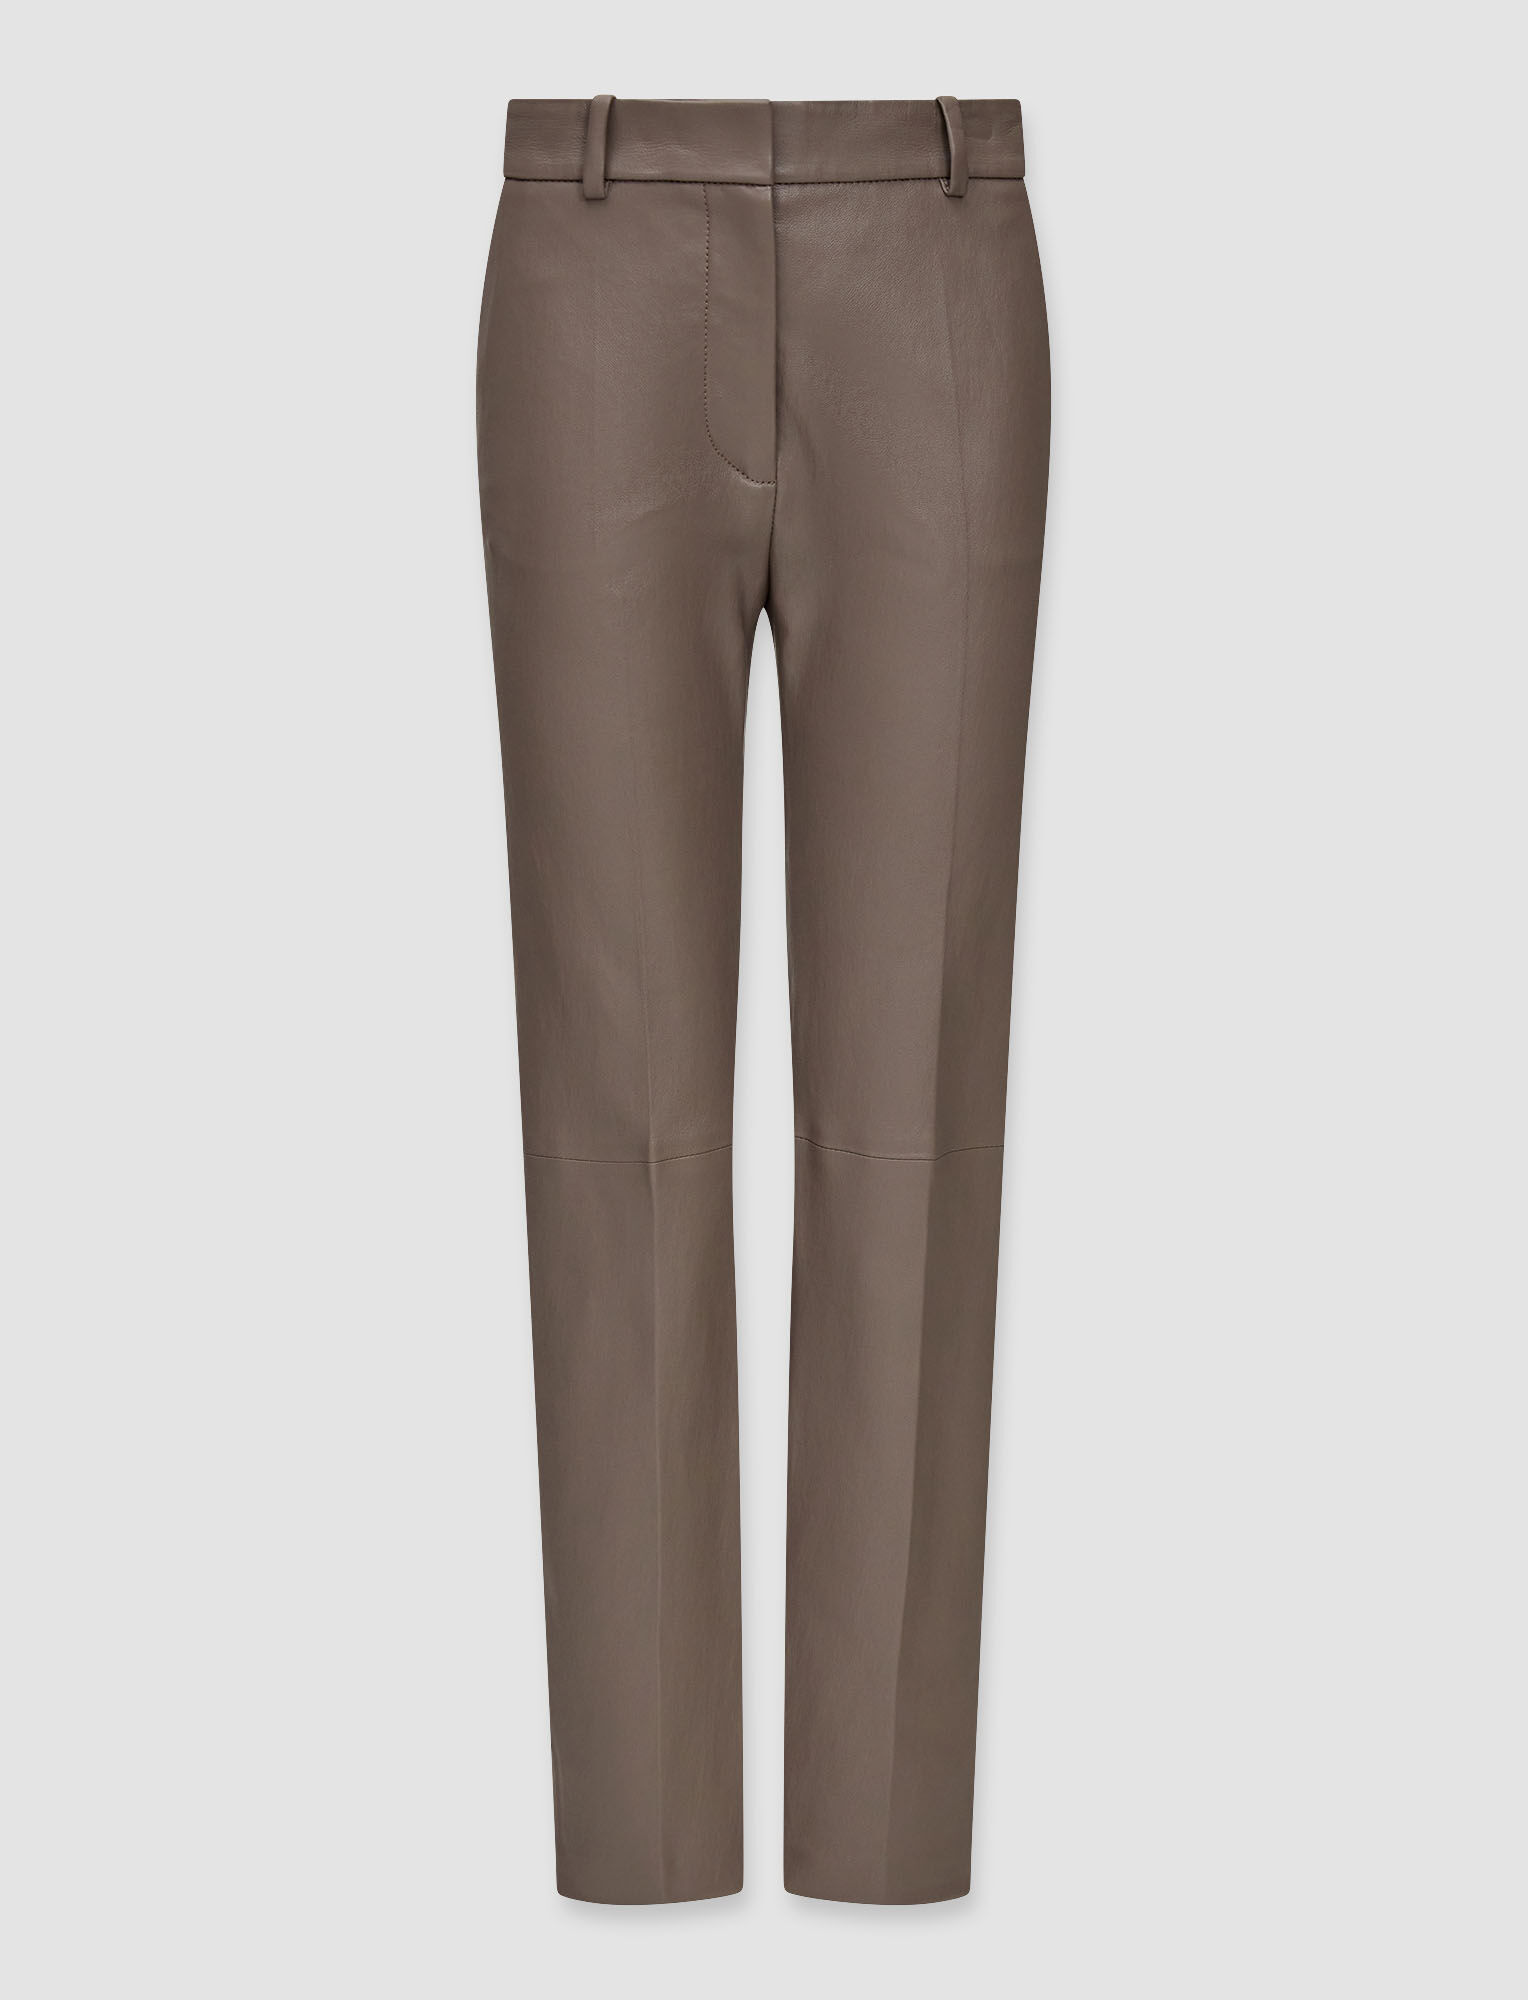 Joseph, Leather Stretch Coleman Trousers, in Truffle